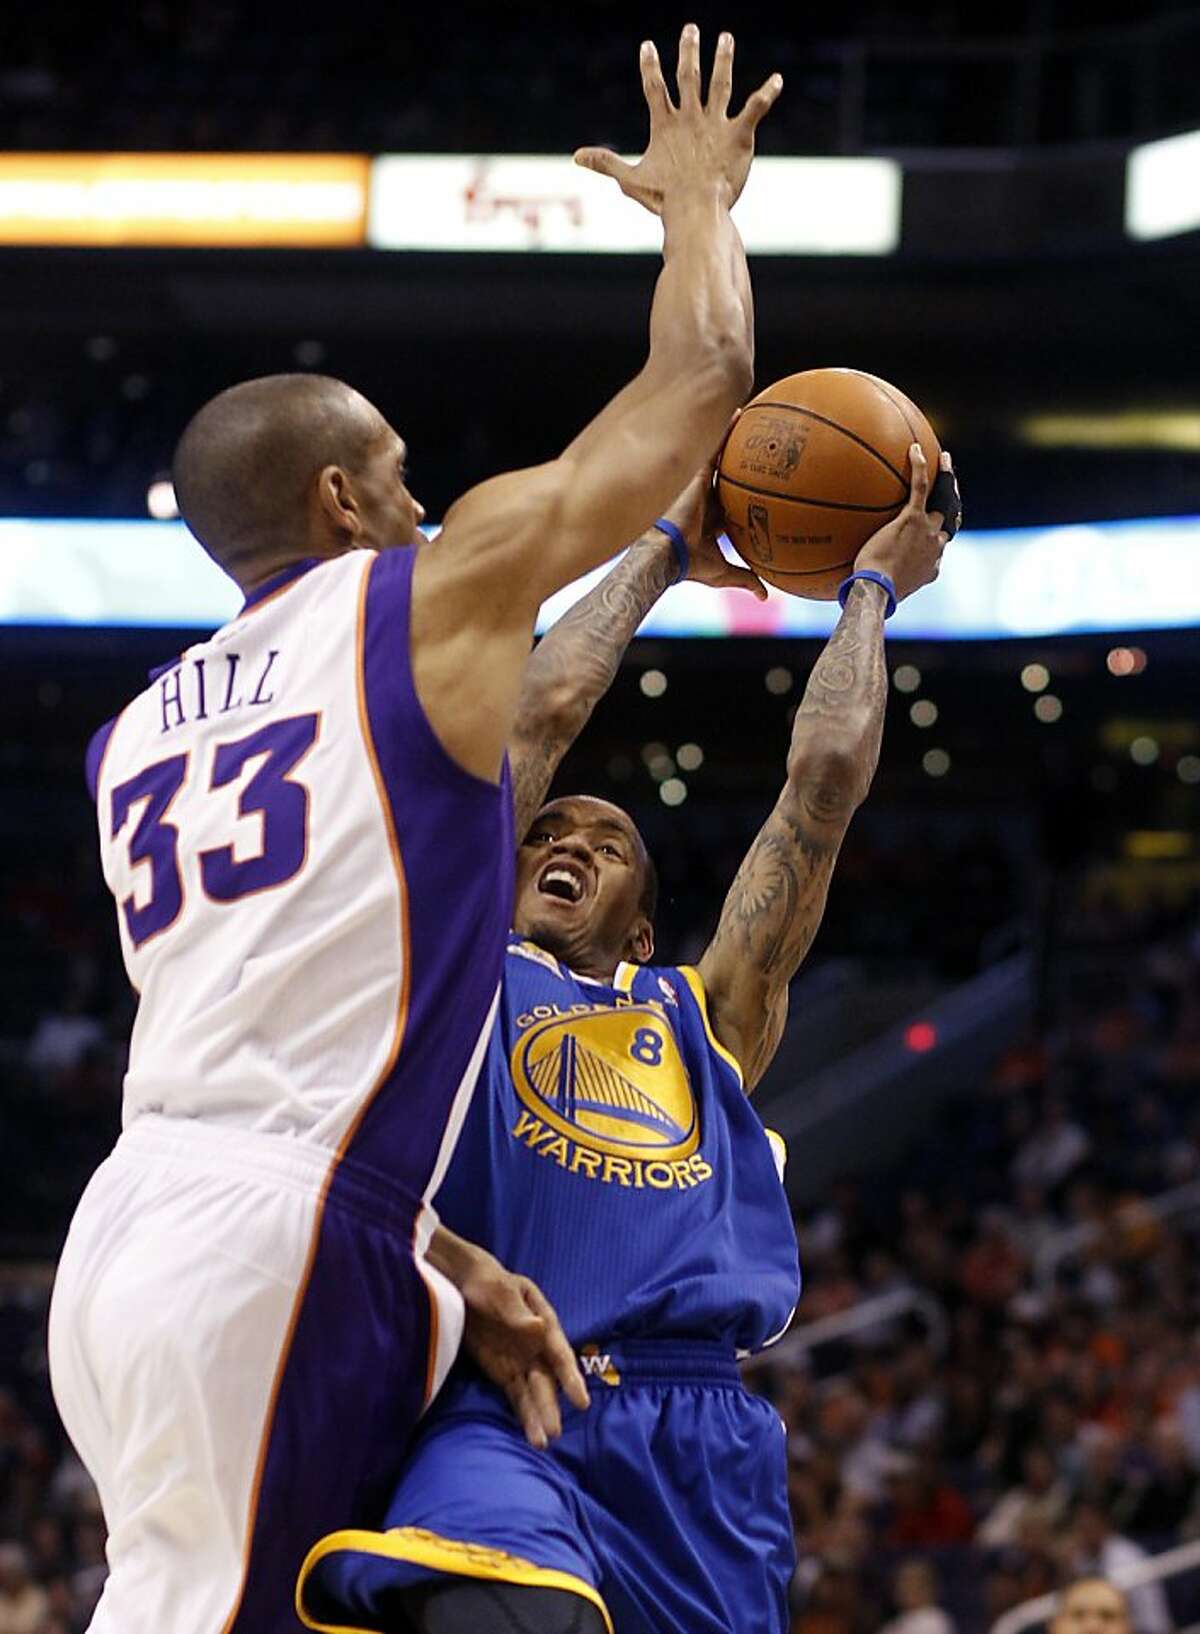 Golden State Warriors guard Monta Ellis, right, throws up a shot as he collides with Phoenix Suns forward Grant Hill (33) during the first quarter of an NBA basketball game Wednesday, Feb. 22, 2012, in Phoenix.